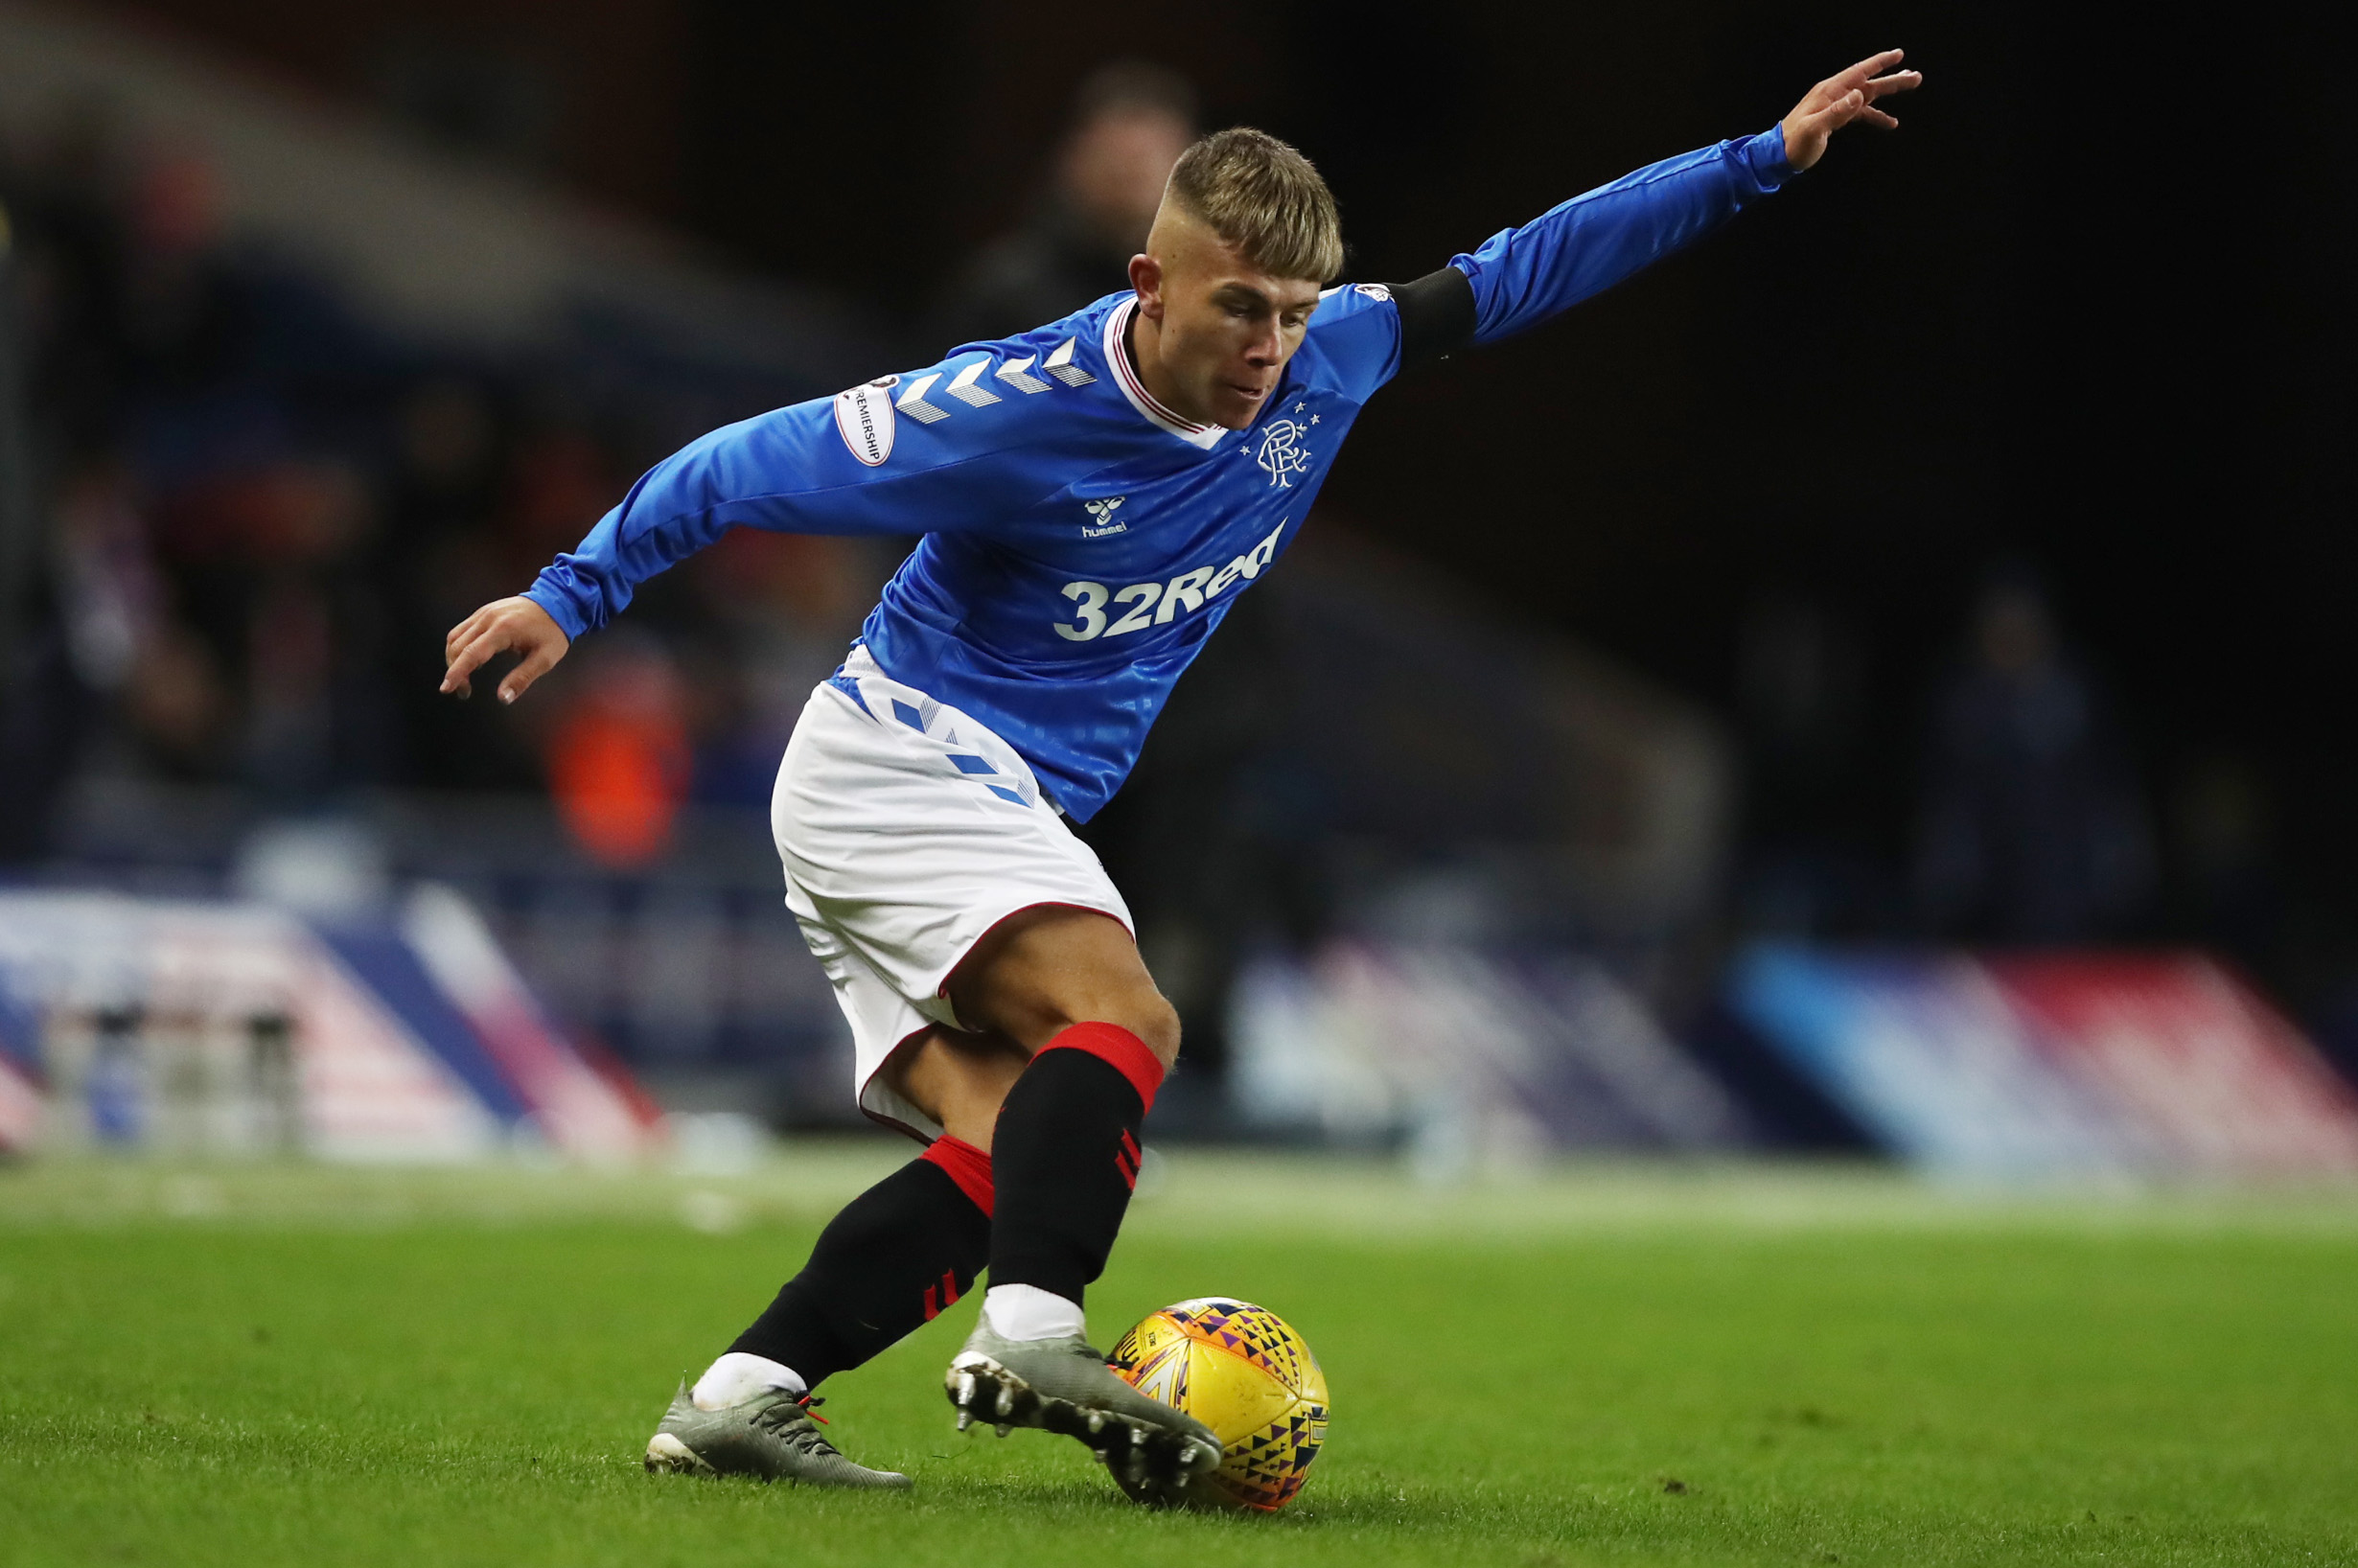 Rangers want more than £600K for Kennedy